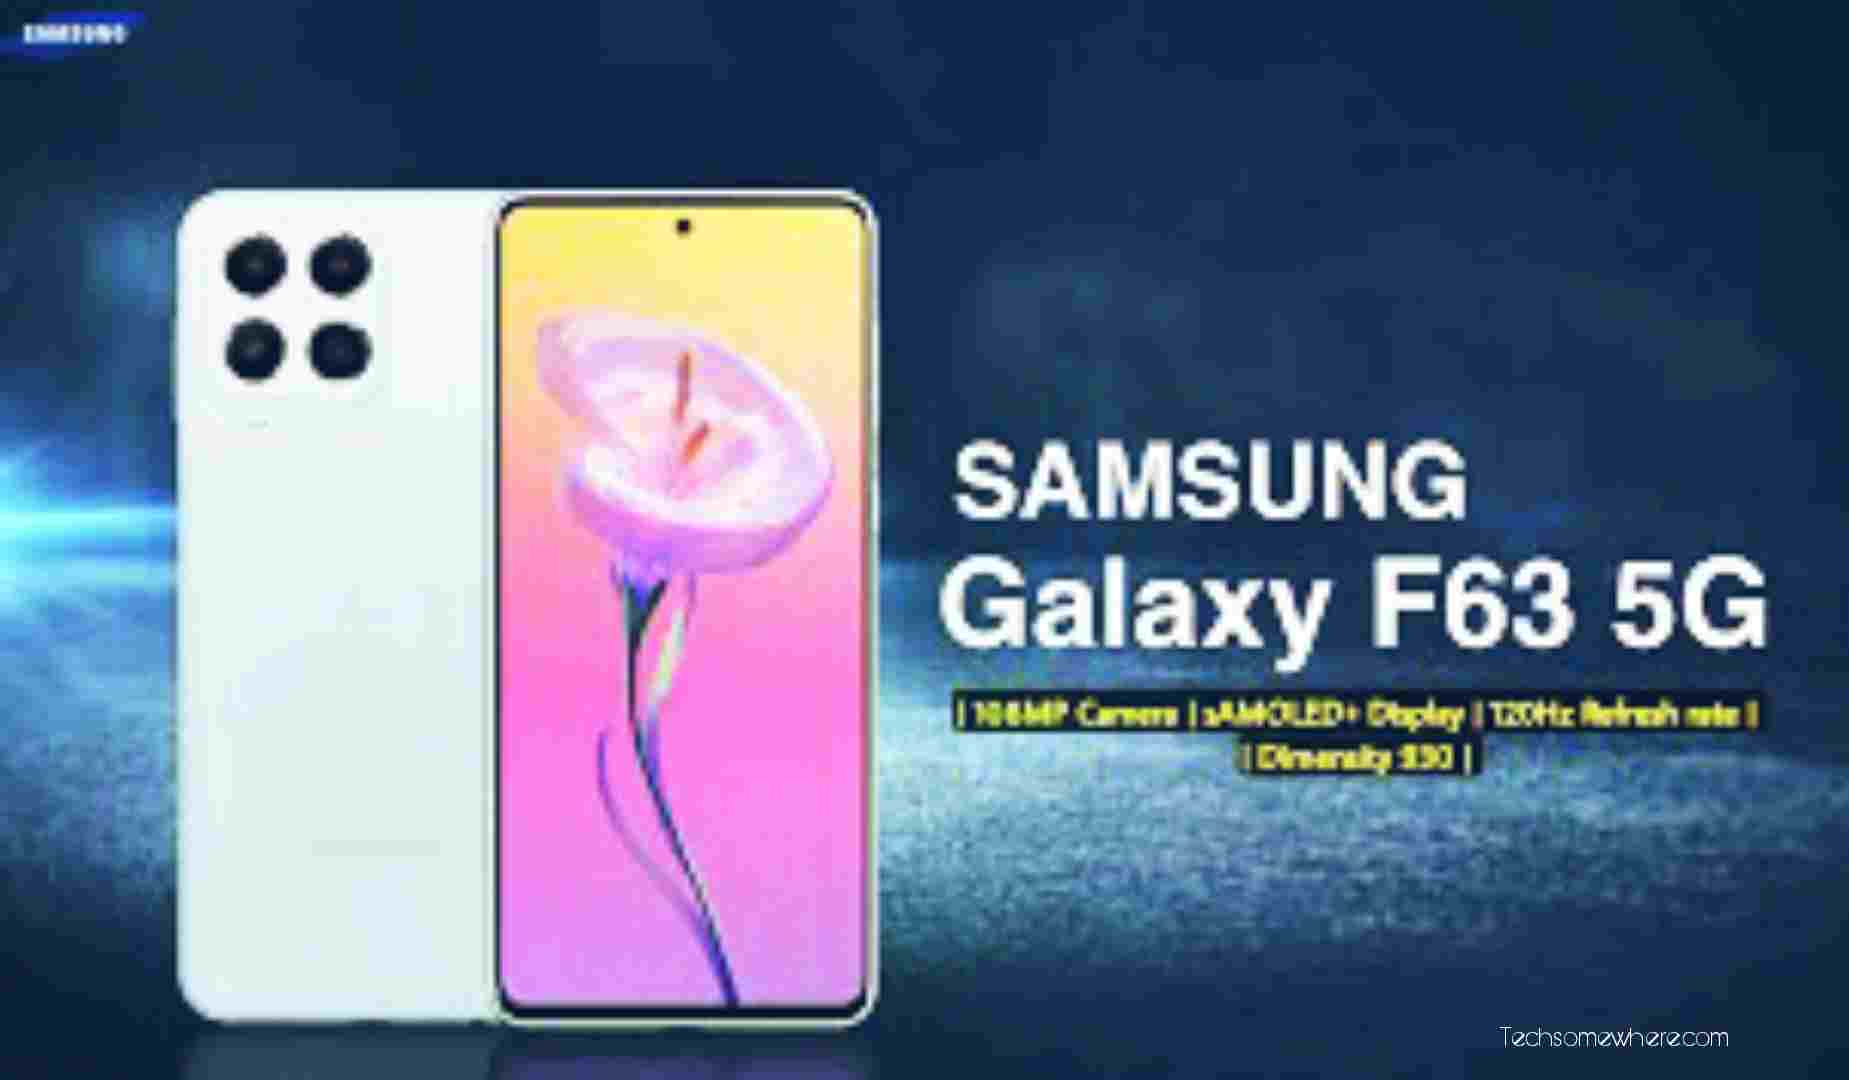 Samsung Galaxy F63 - specs with 7000 mah battery, 6GB RAM, 64MP Camera and Price.